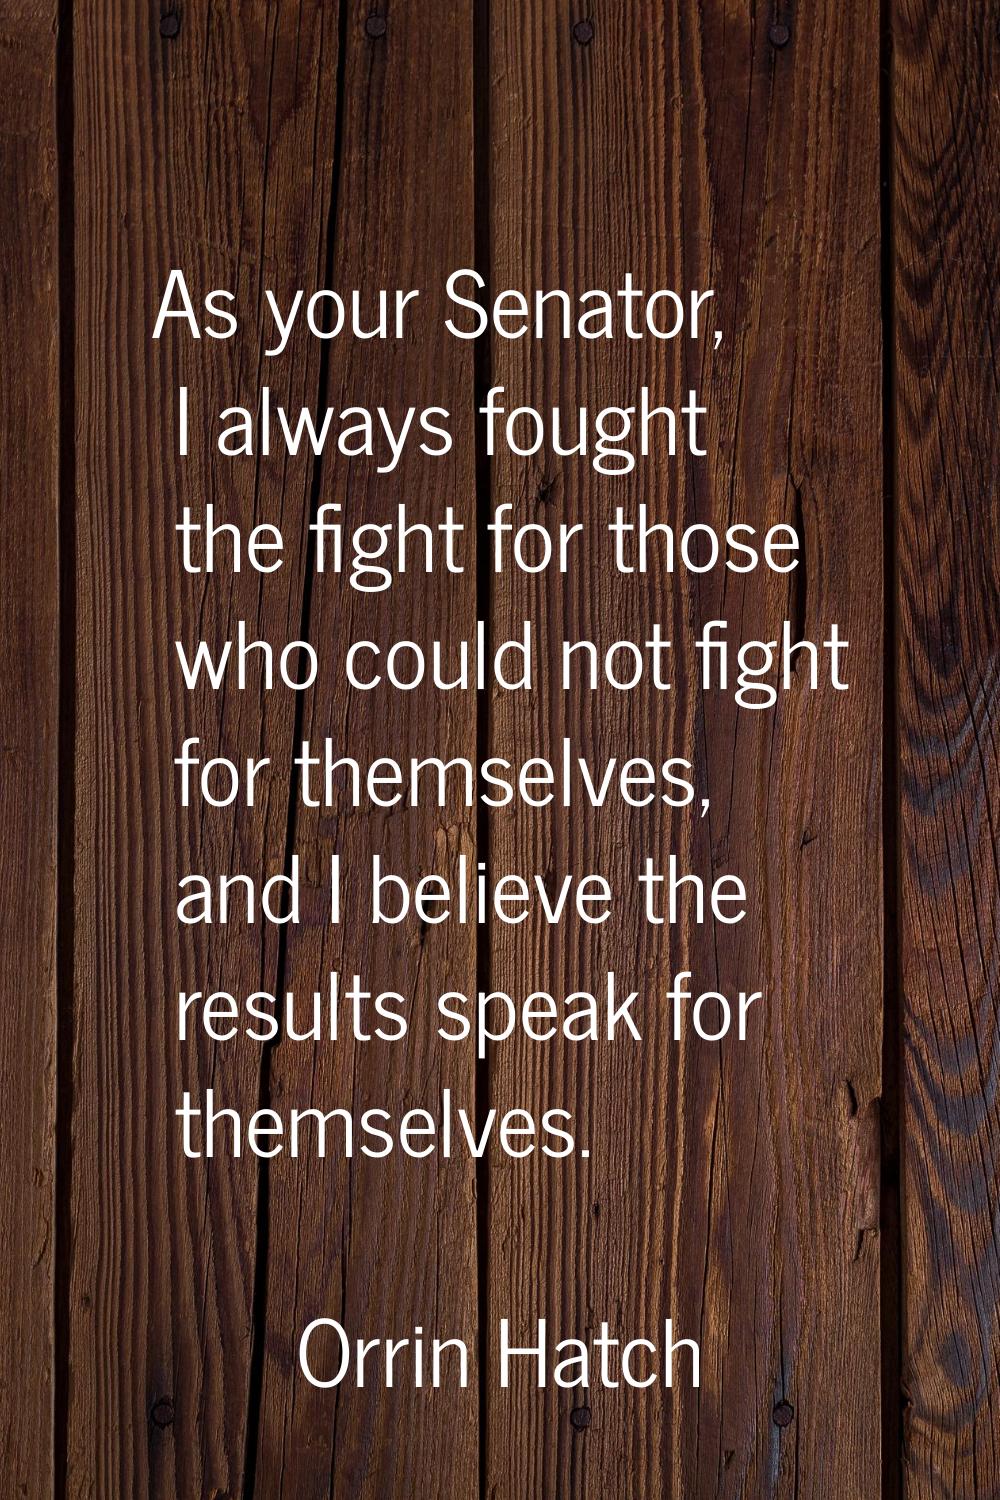 As your Senator, I always fought the fight for those who could not fight for themselves, and I beli